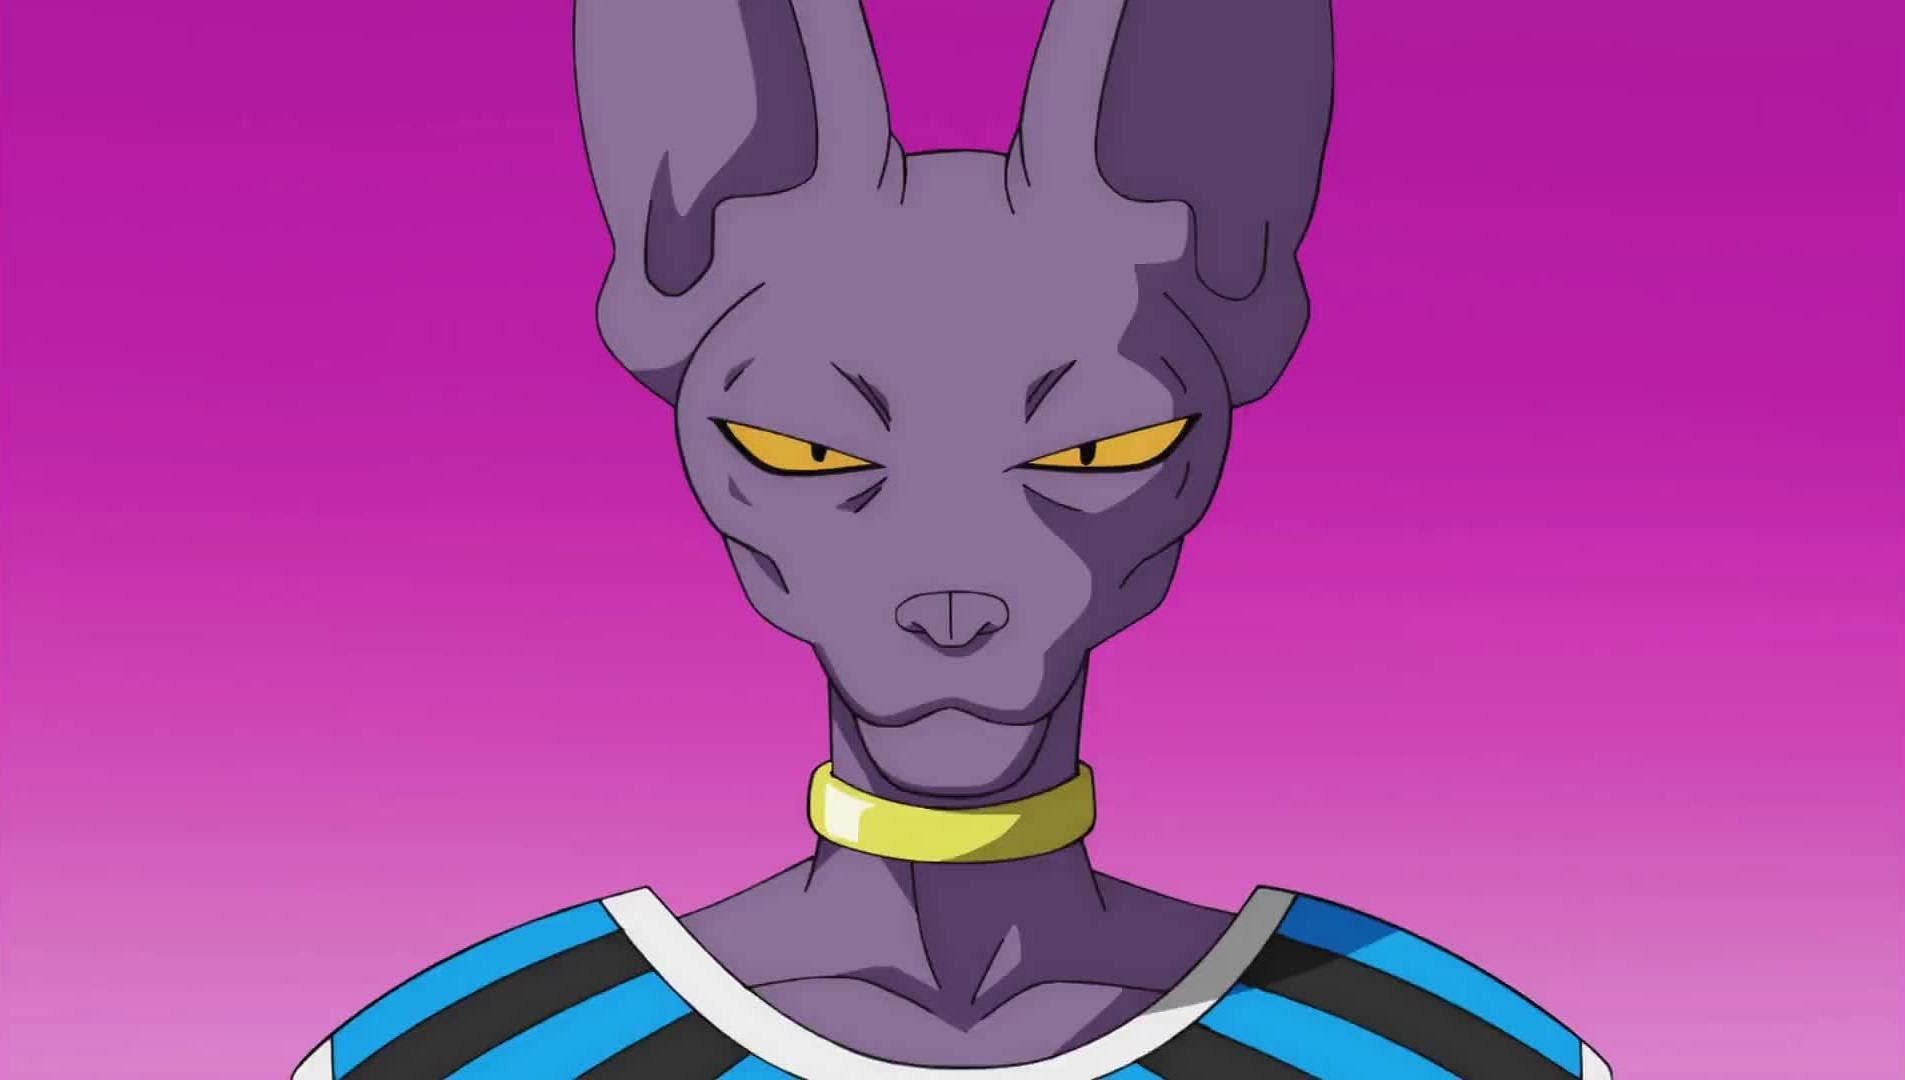 Beerus as he appears in the anime (Image via Toei Animation)